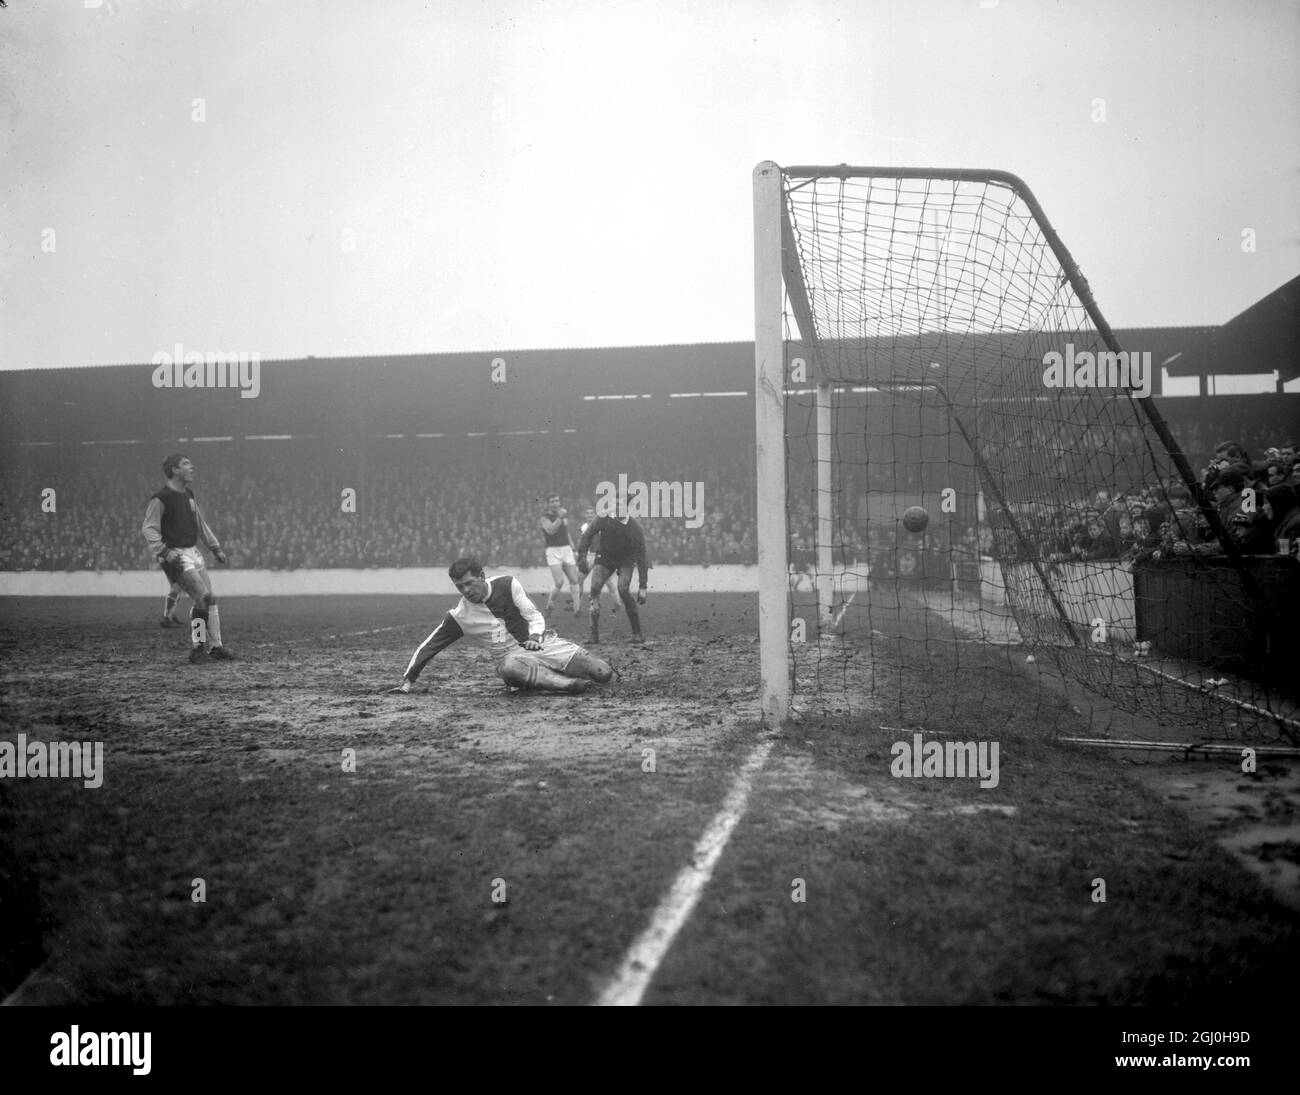 London: mud-caked West ham goalkeeper Jim Standen (Dark Jersey and Shorts), looks dismayed as the ball enters the net for Blackburn's third goal at today's Boxing Day soccer match at Upton Park, London. E. The goal was scored by Andy McEvoy, who is seen falling on the rain soaked pitch after making his successful head in effort. 26 December 1963 Stock Photo